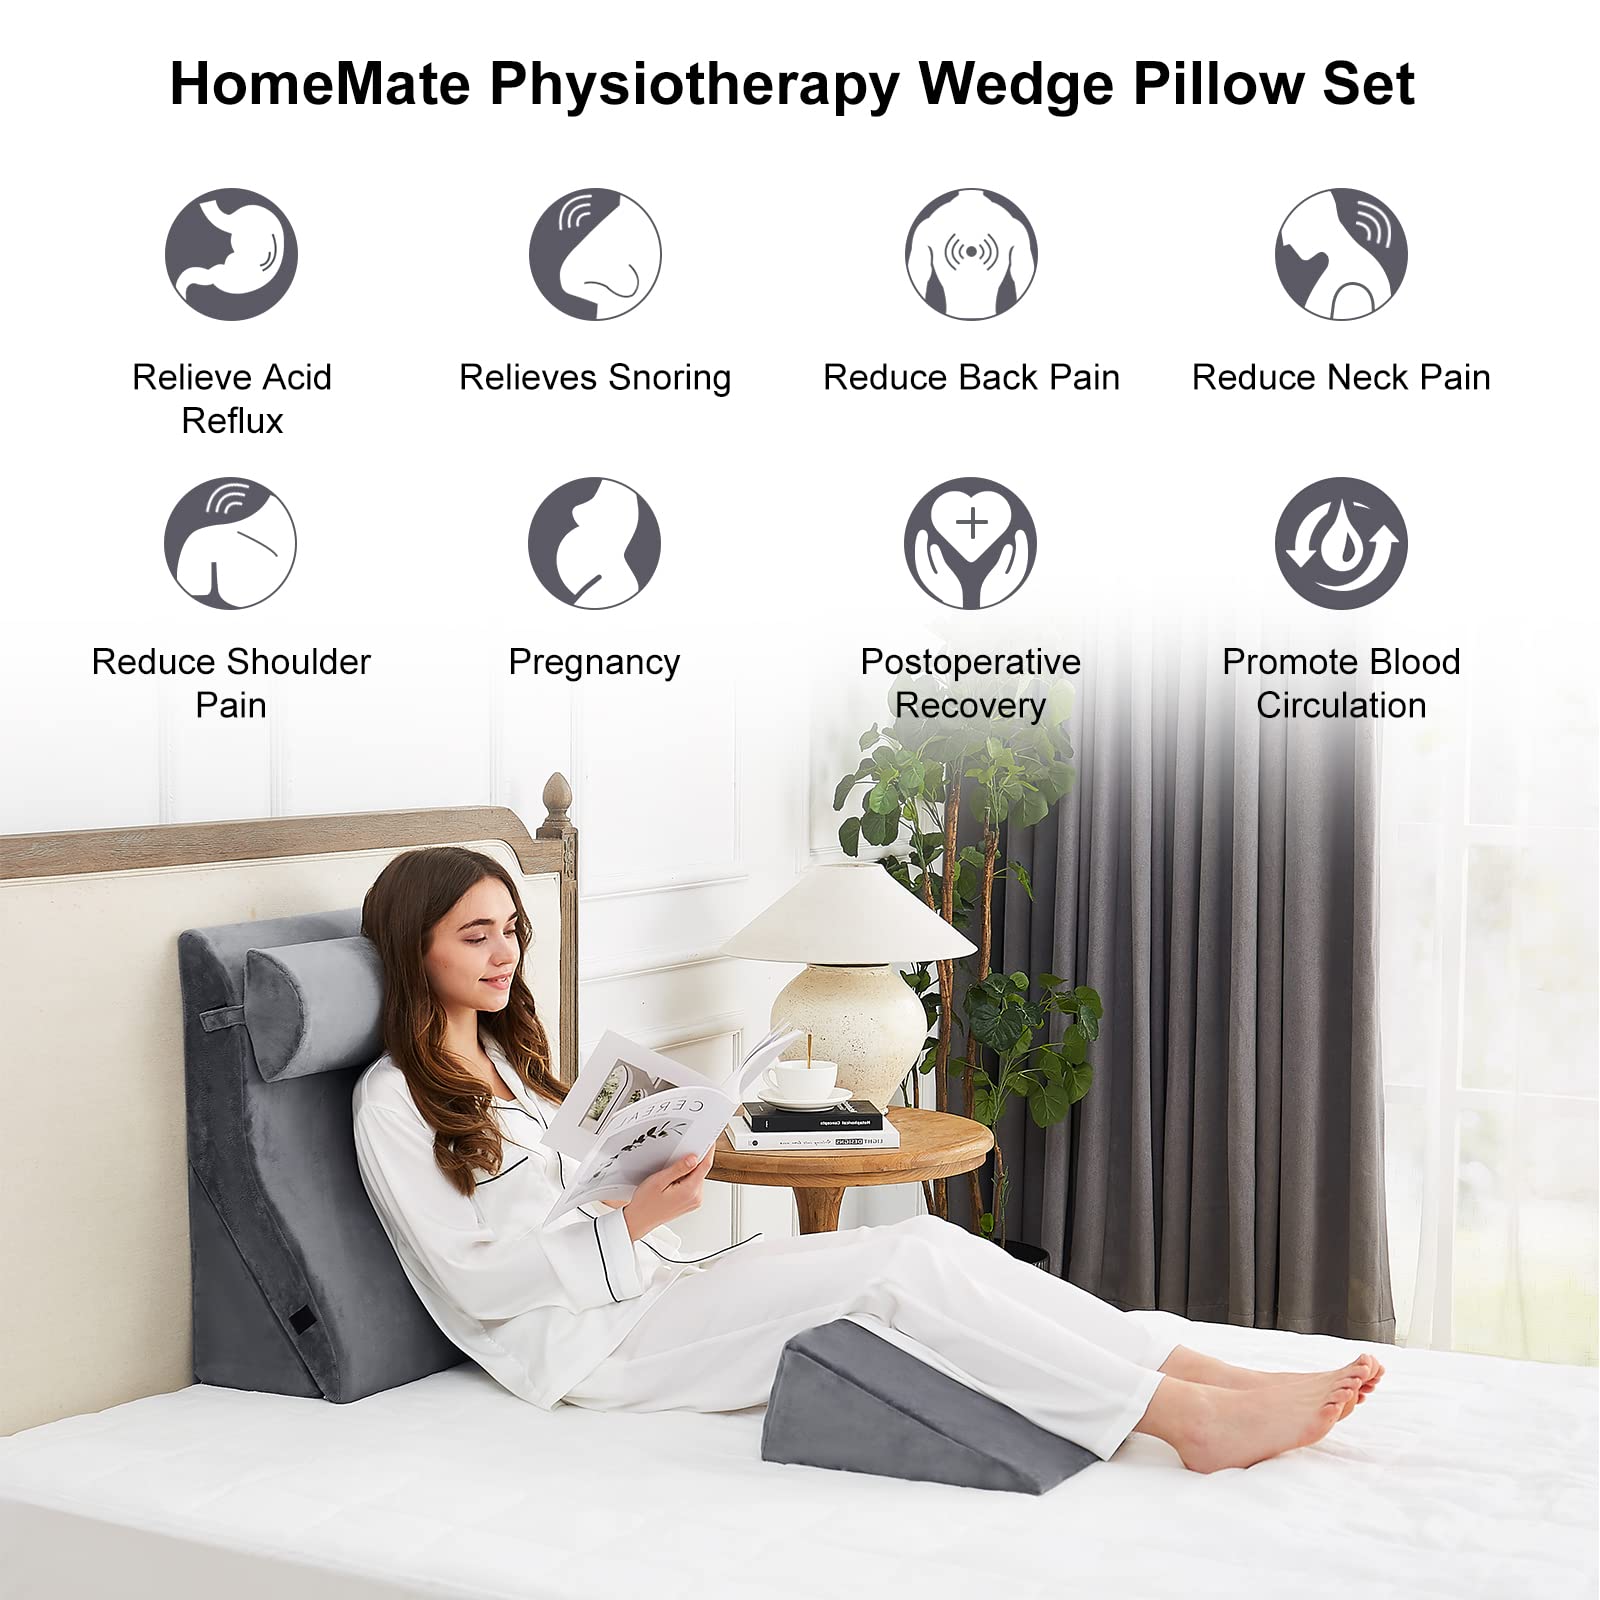 HomeMate 4PCS Orthopedic Bed Wedge Pillow Set, Post Surgery Foam Pillows for Neck, Back and Leg Pain Relief, Adjustable Wedge Pillow for Sleeping-Acid Reflux,Anti Snoring, GERD Sleeping & Heartburn